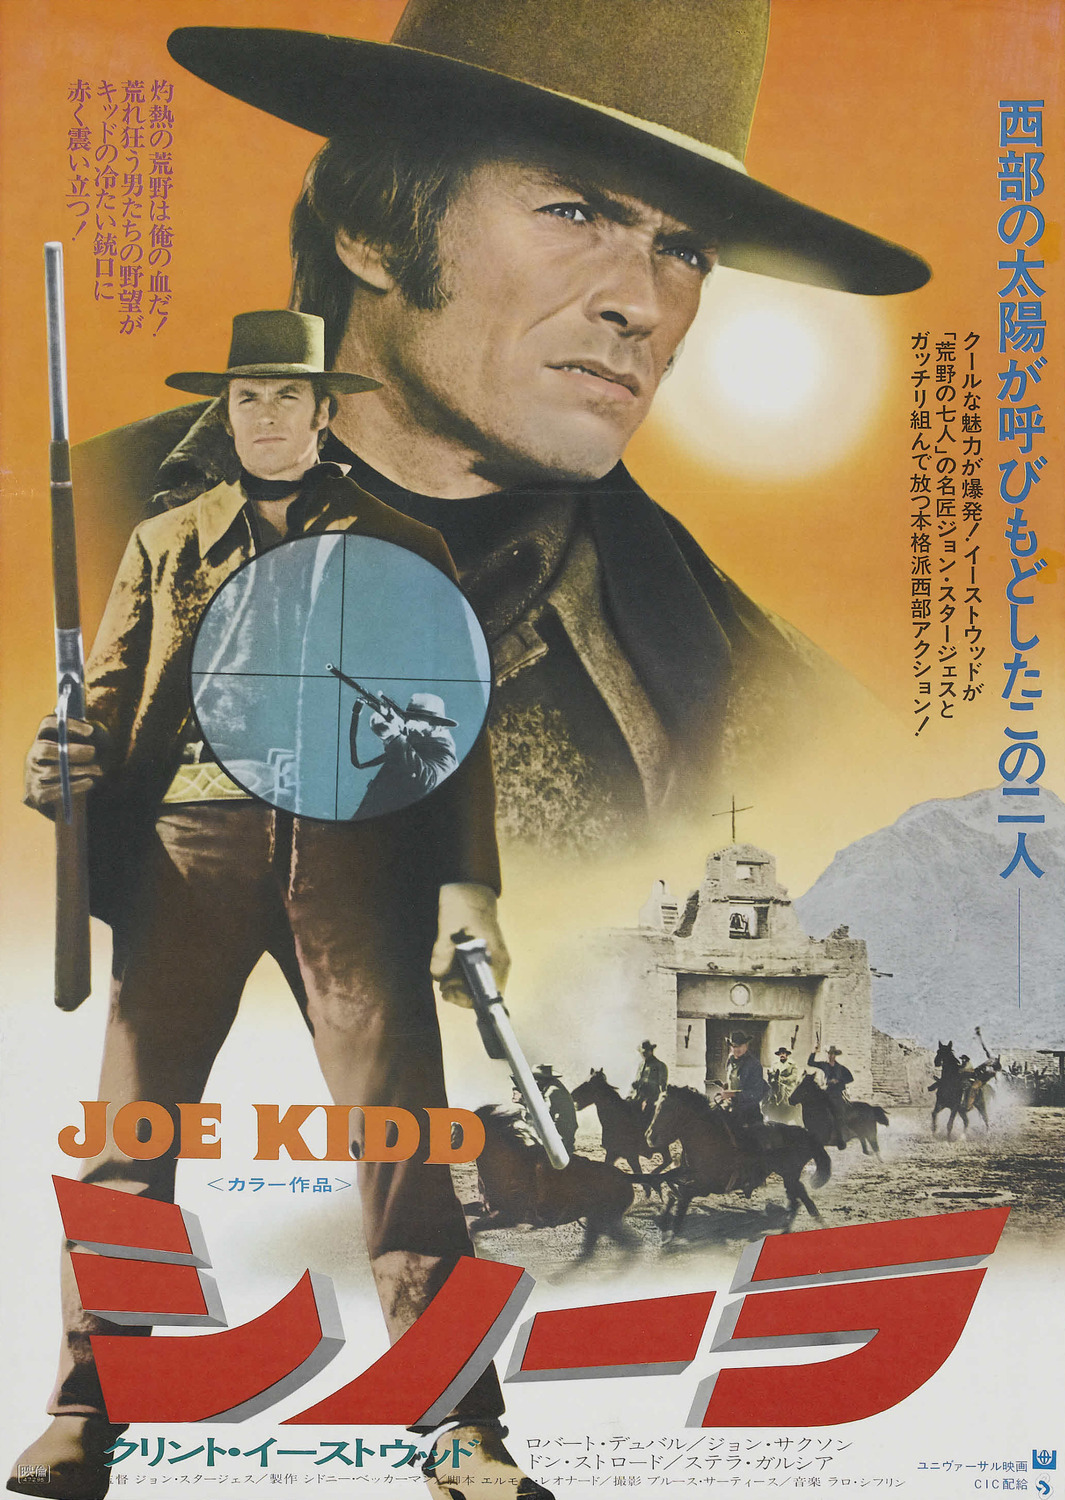 Extra Large Movie Poster Image for Joe Kidd (#2 of 5)